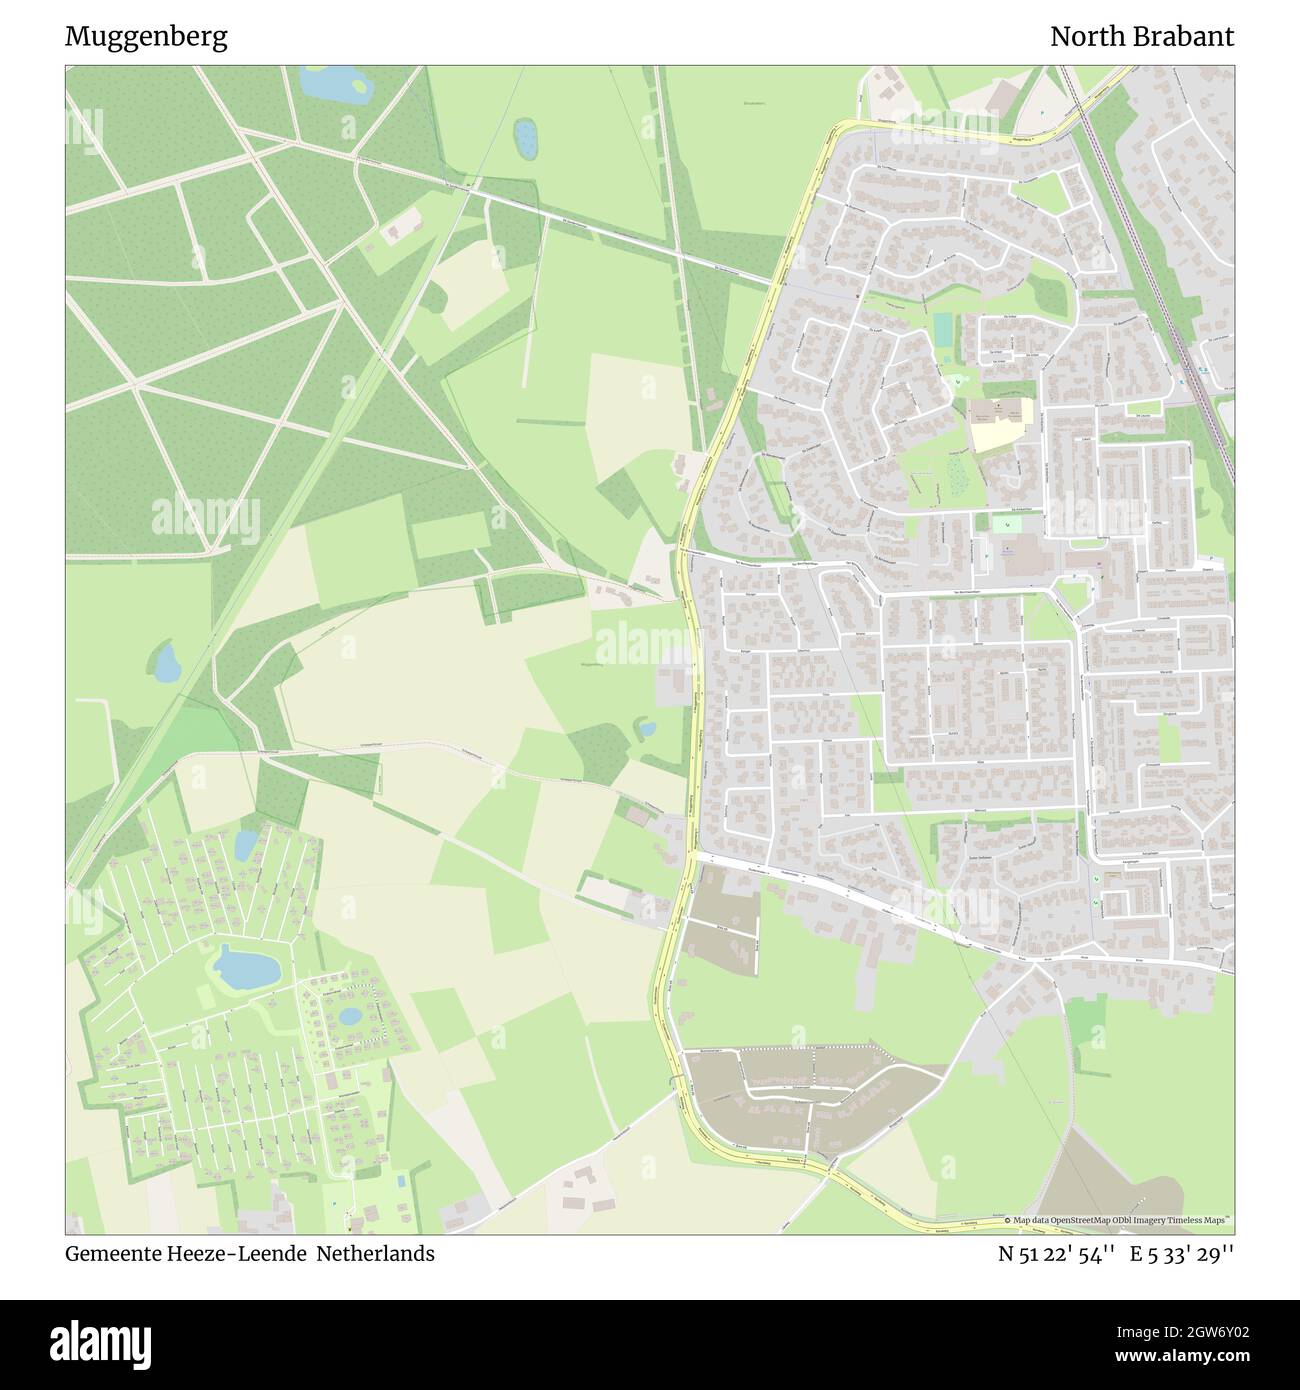 Muggenberg, Gemeente Heeze-Leende, Netherlands, North Brabant, N 51 22' 54'', E 5 33' 29'', map, Timeless Map published in 2021. Travelers, explorers and adventurers like Florence Nightingale, David Livingstone, Ernest Shackleton, Lewis and Clark and Sherlock Holmes relied on maps to plan travels to the world's most remote corners, Timeless Maps is mapping most locations on the globe, showing the achievement of great dreams Stock Photo